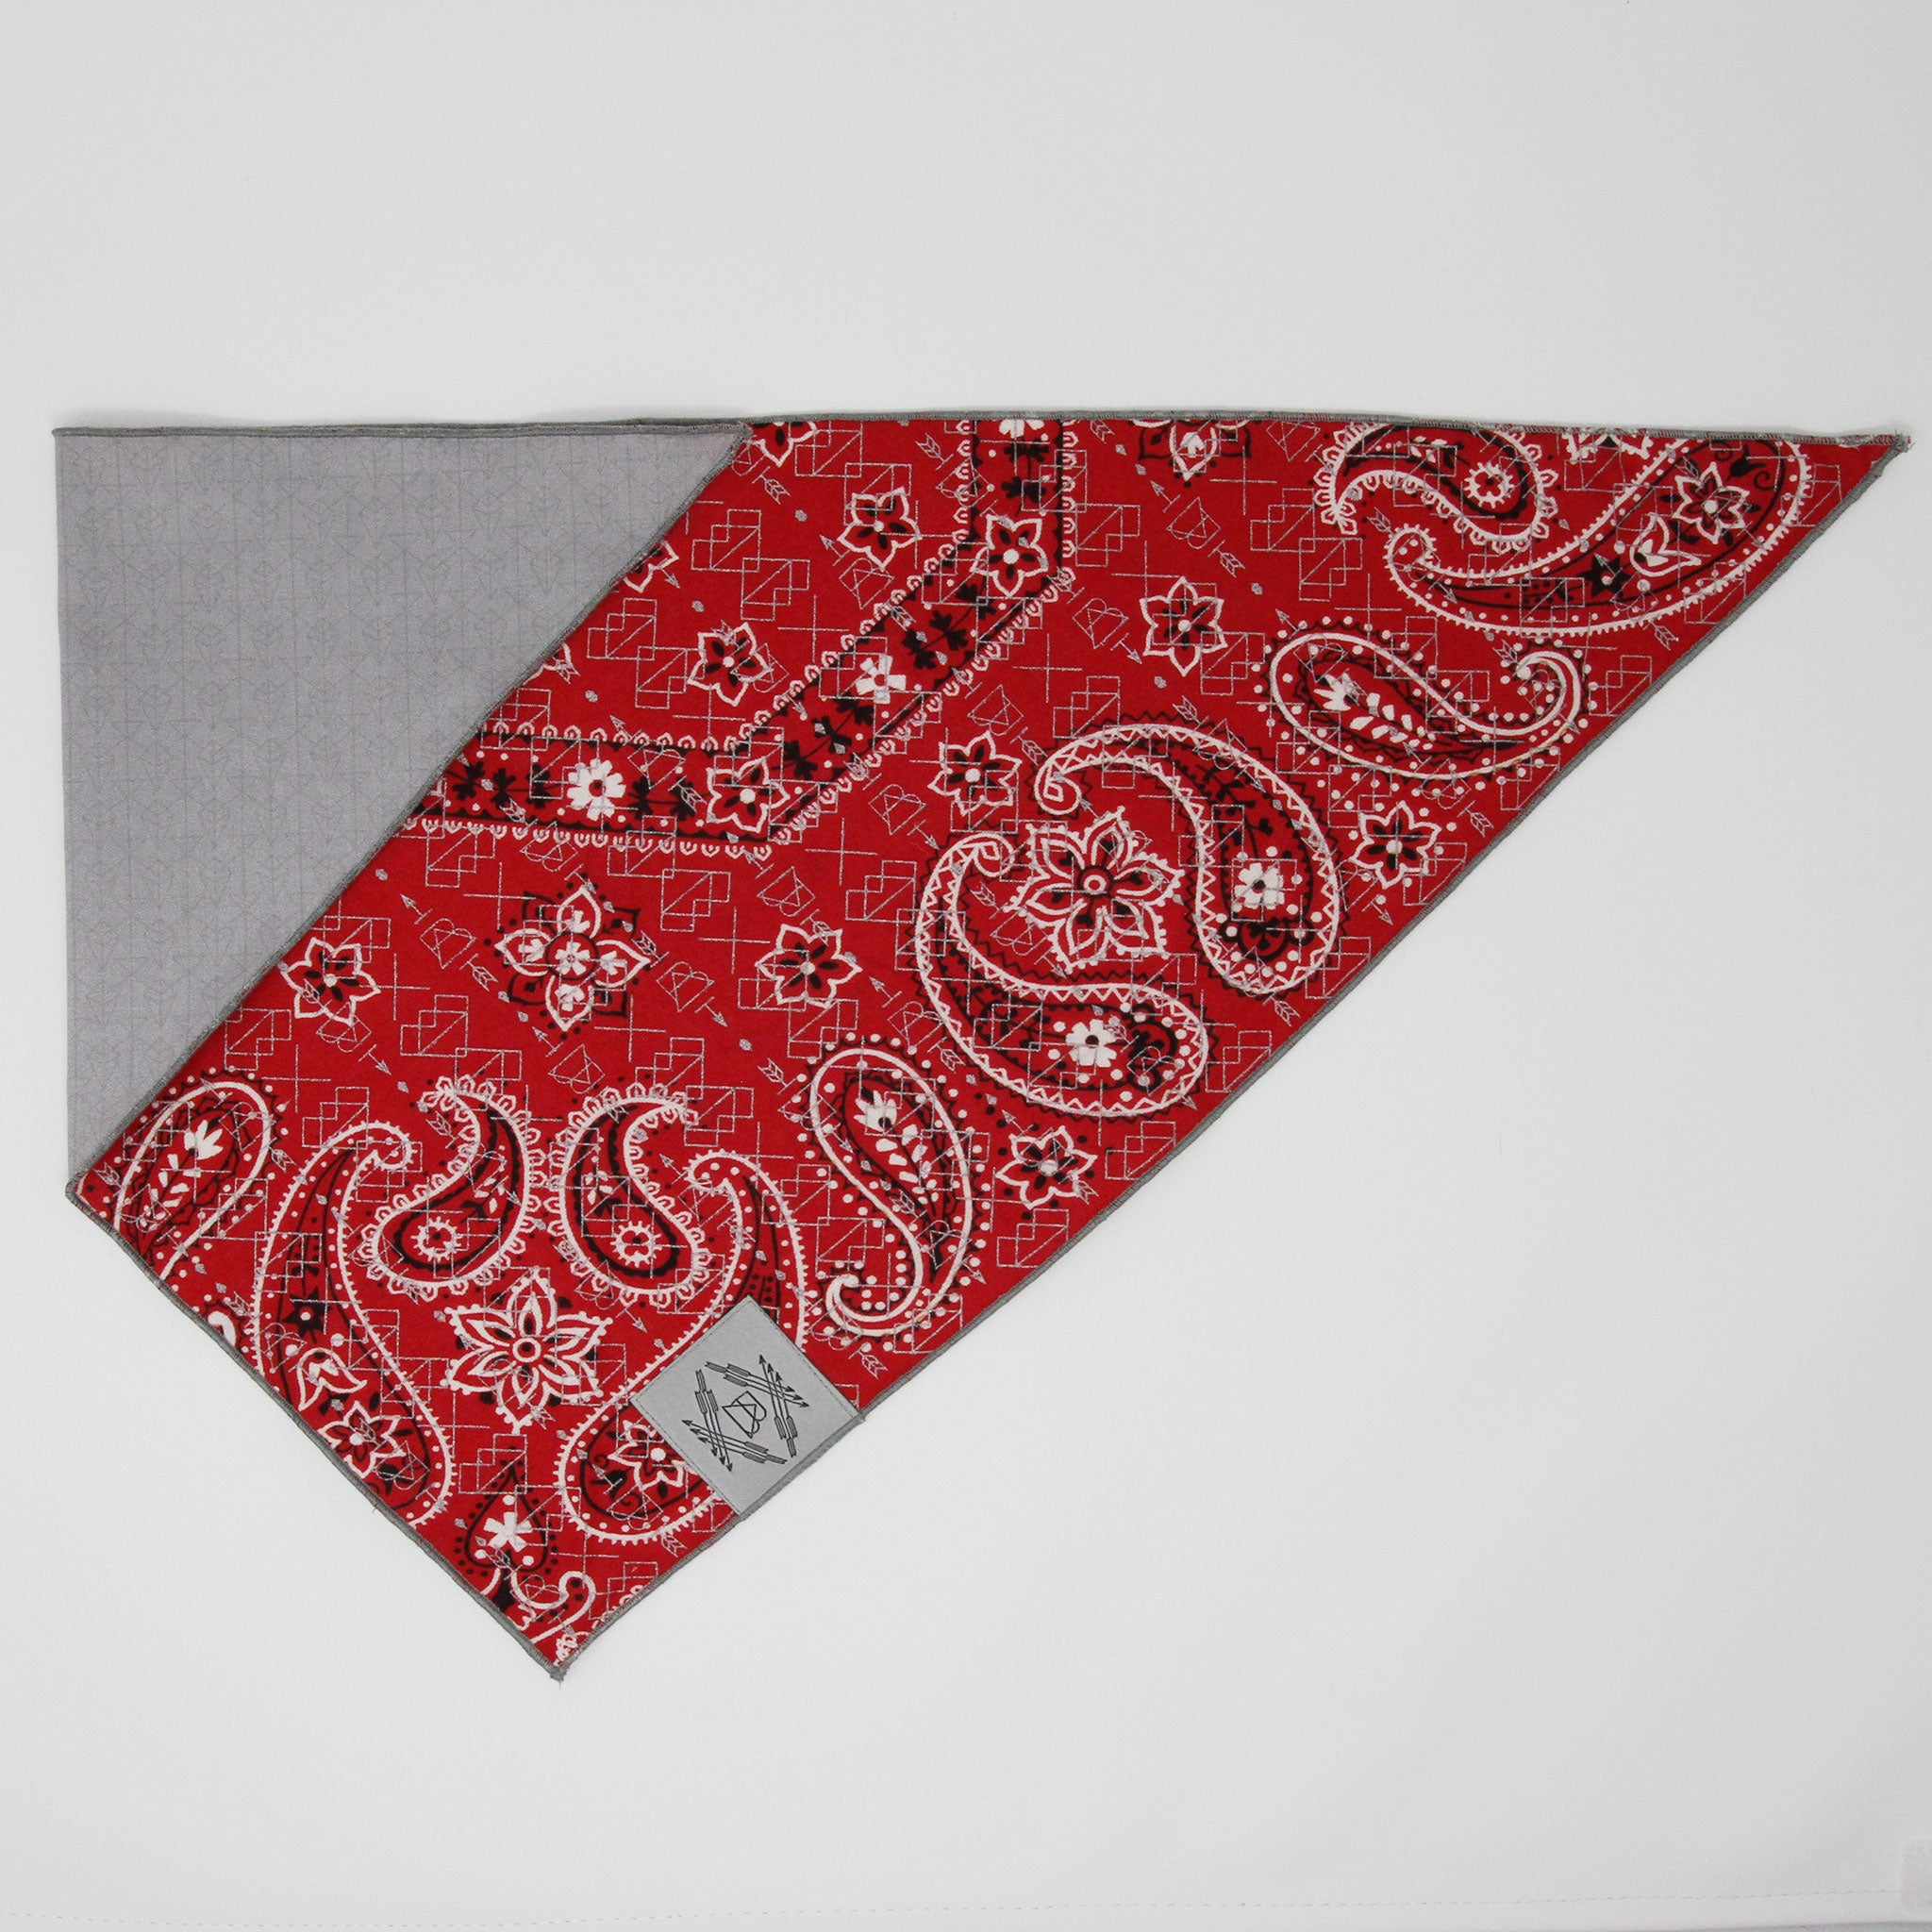 Classic Red Vintage Dog Bandana With Metallic Silver Screen Printing